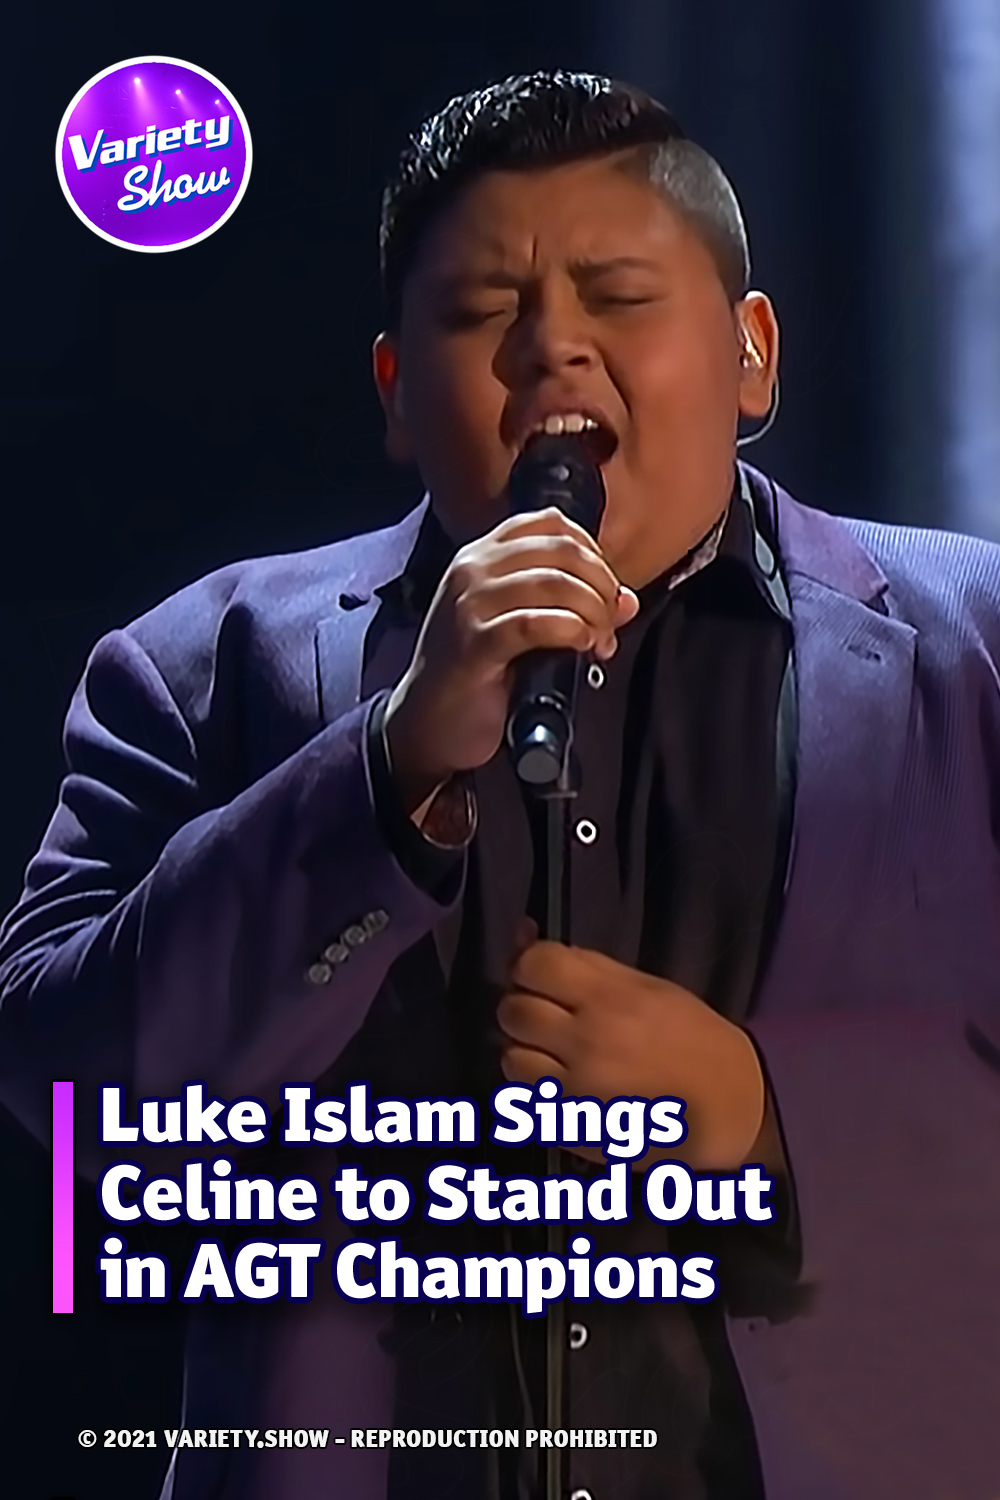 Luke Islam Sings Celine to Stand Out in AGT Champions